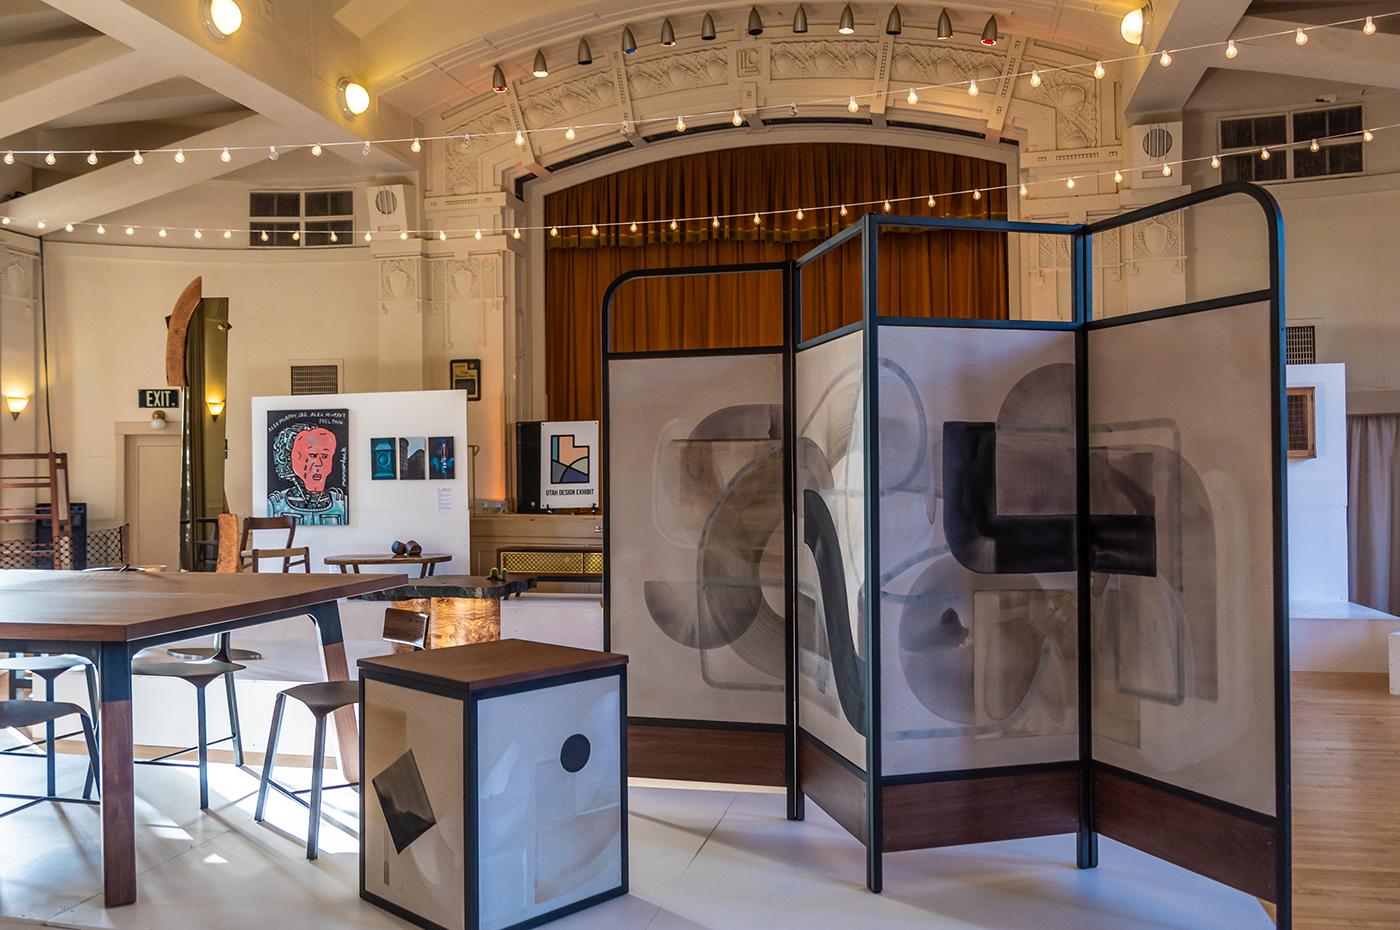 Utah’s design community rallies around Salt Lake Design Week, a collection of exhibitions centered around showcasing the talented artists in our state.